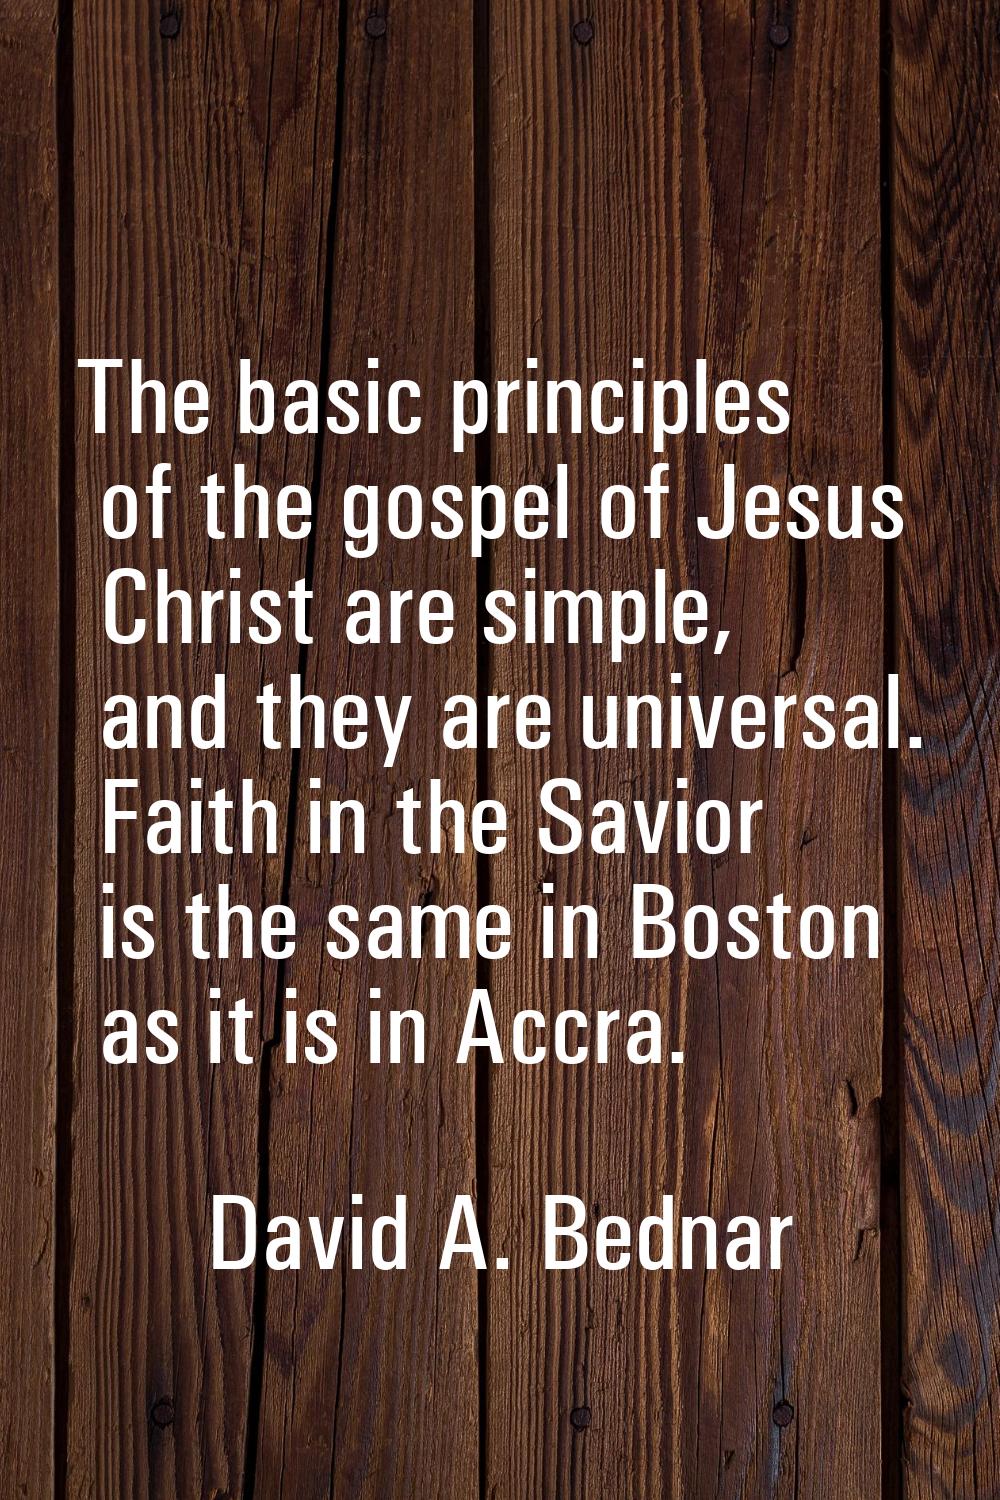 The basic principles of the gospel of Jesus Christ are simple, and they are universal. Faith in the